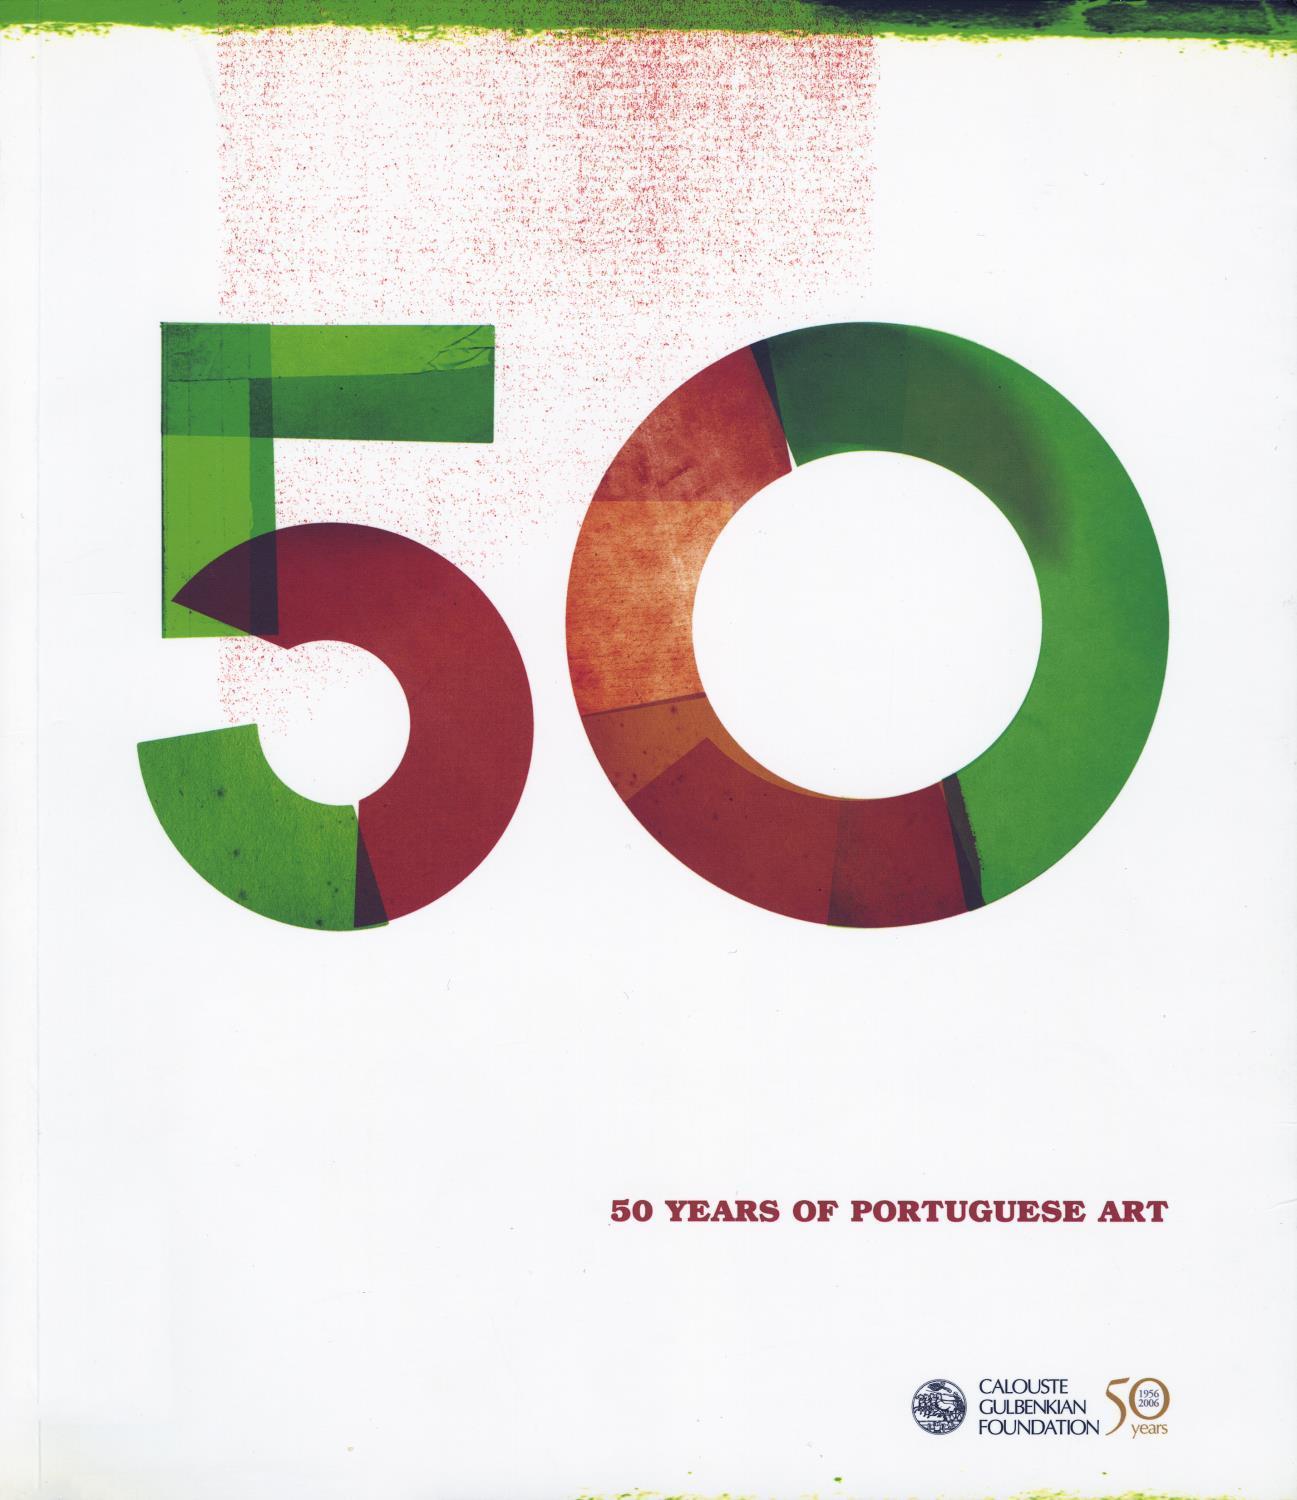 50 Years of Portuguese Art